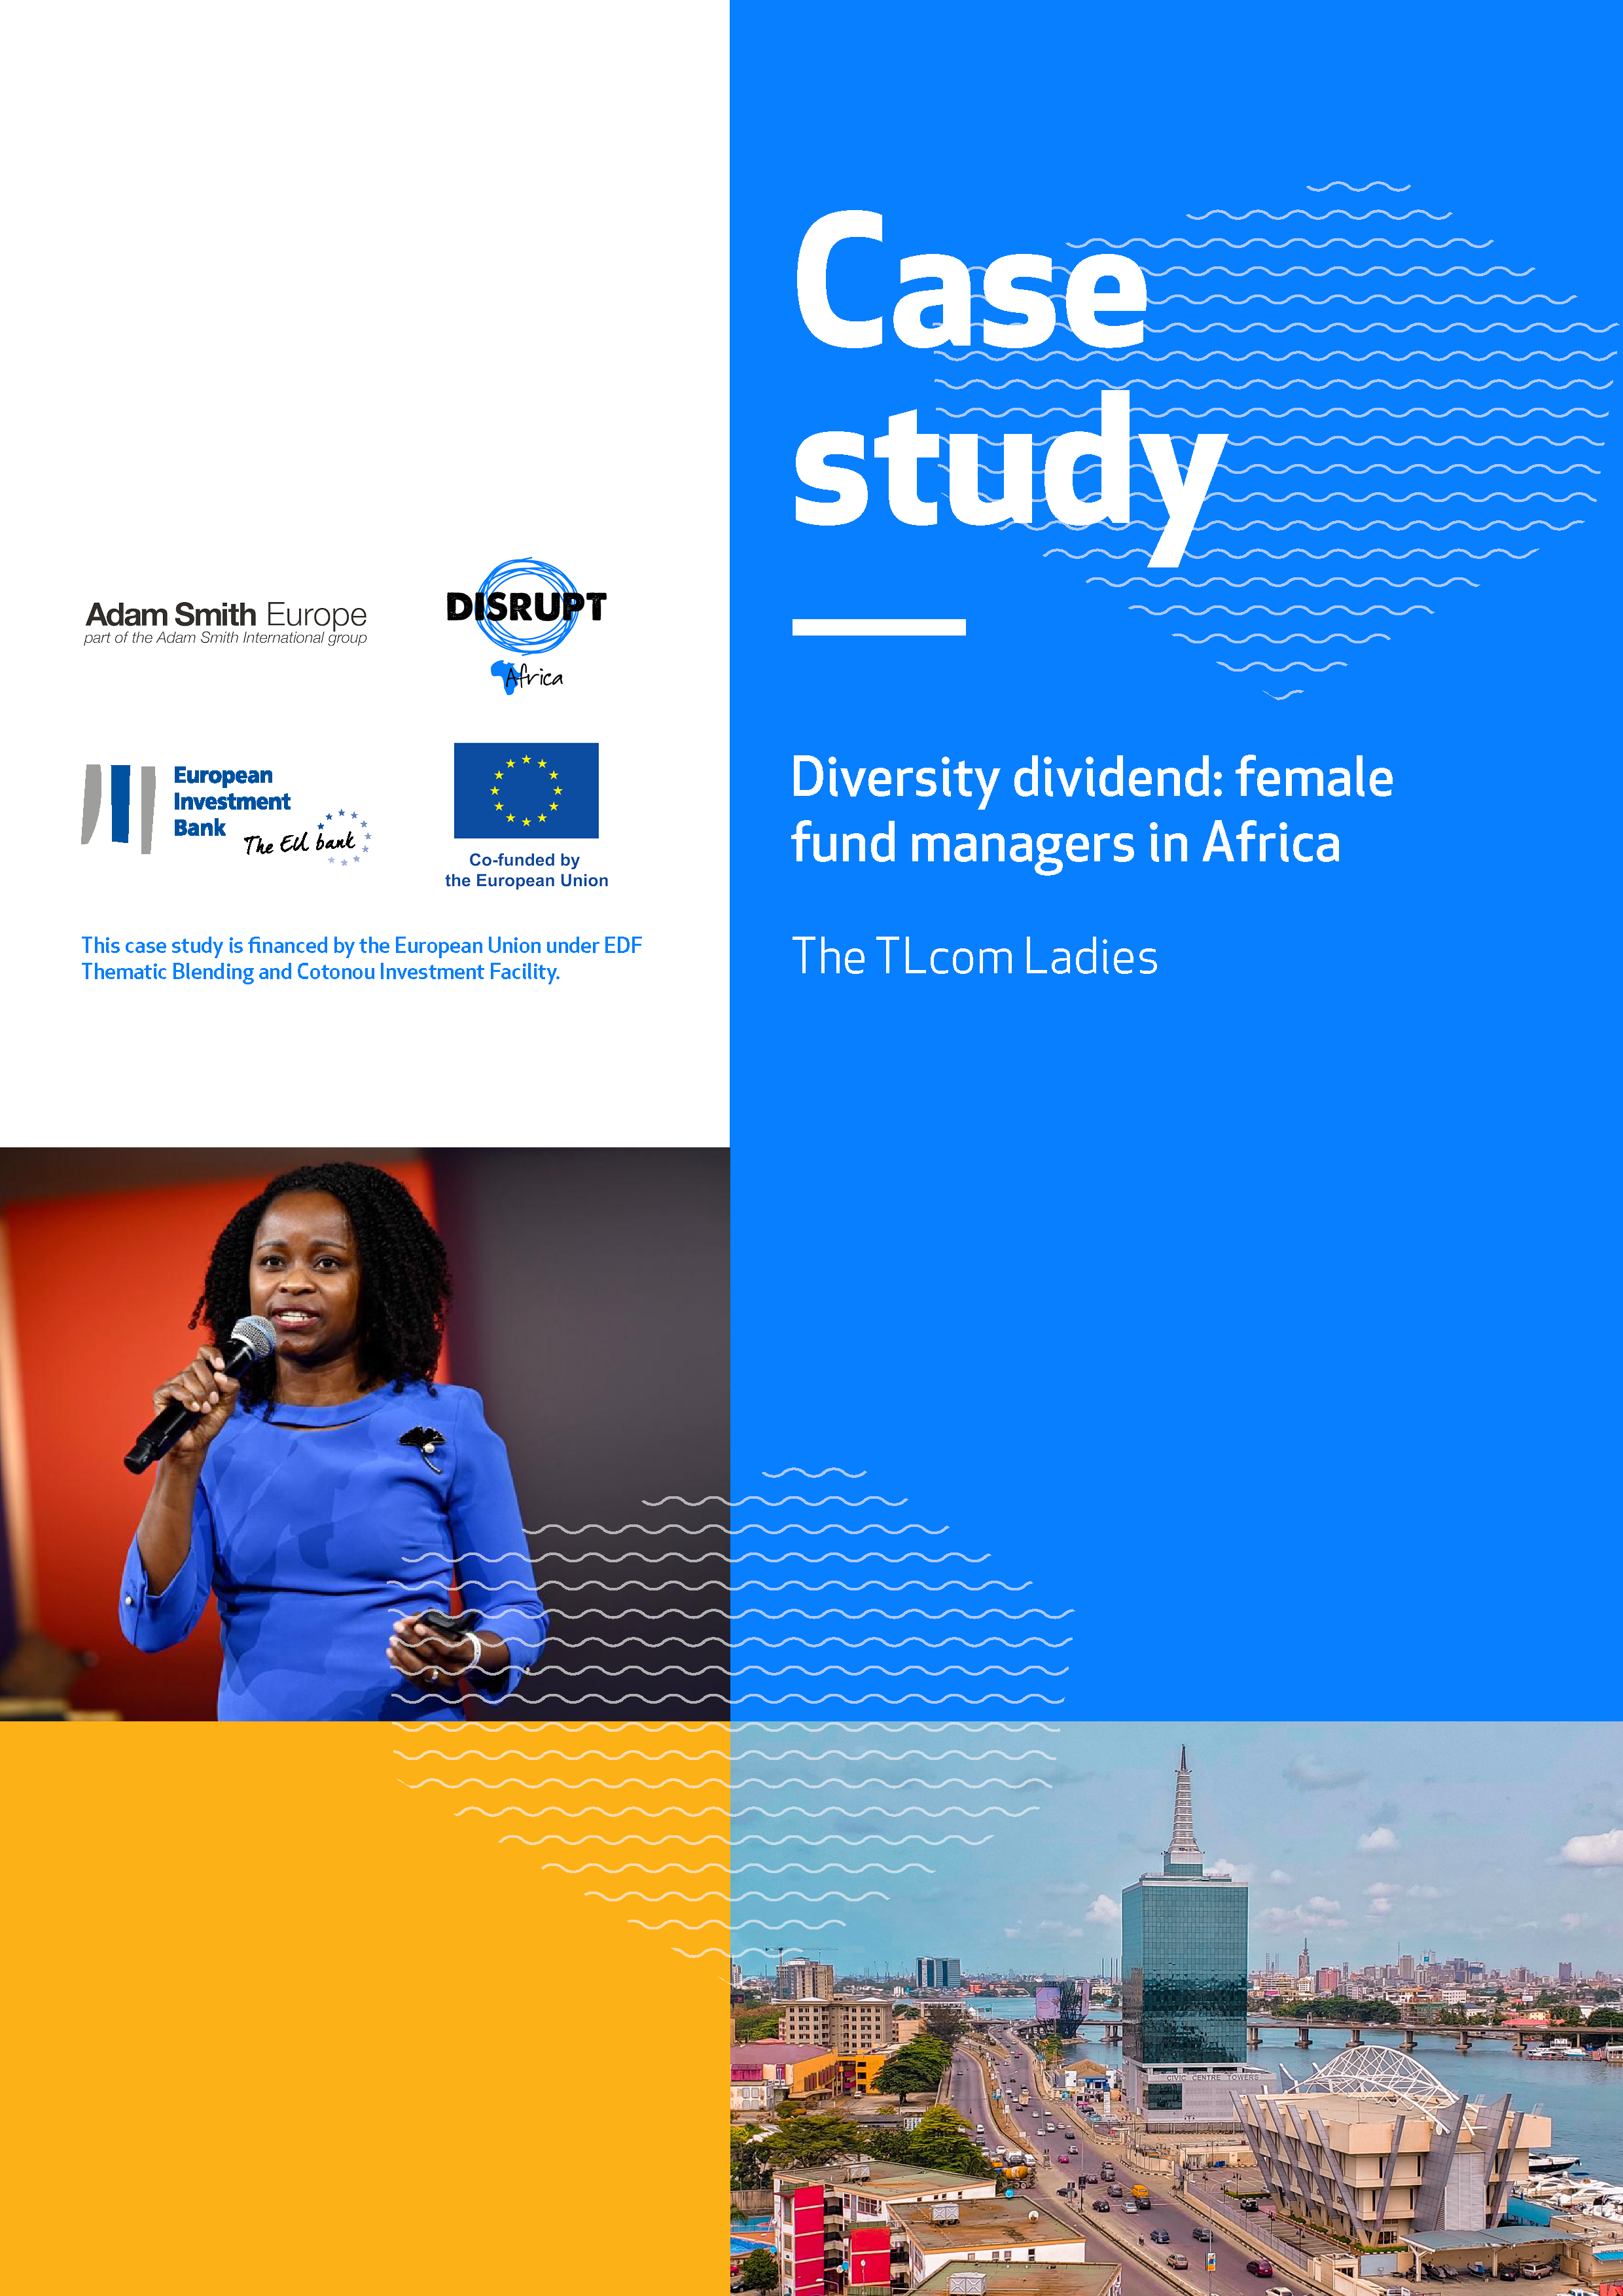 Diversity dividend: Female fund managers in Africa – The TLcom Ladies